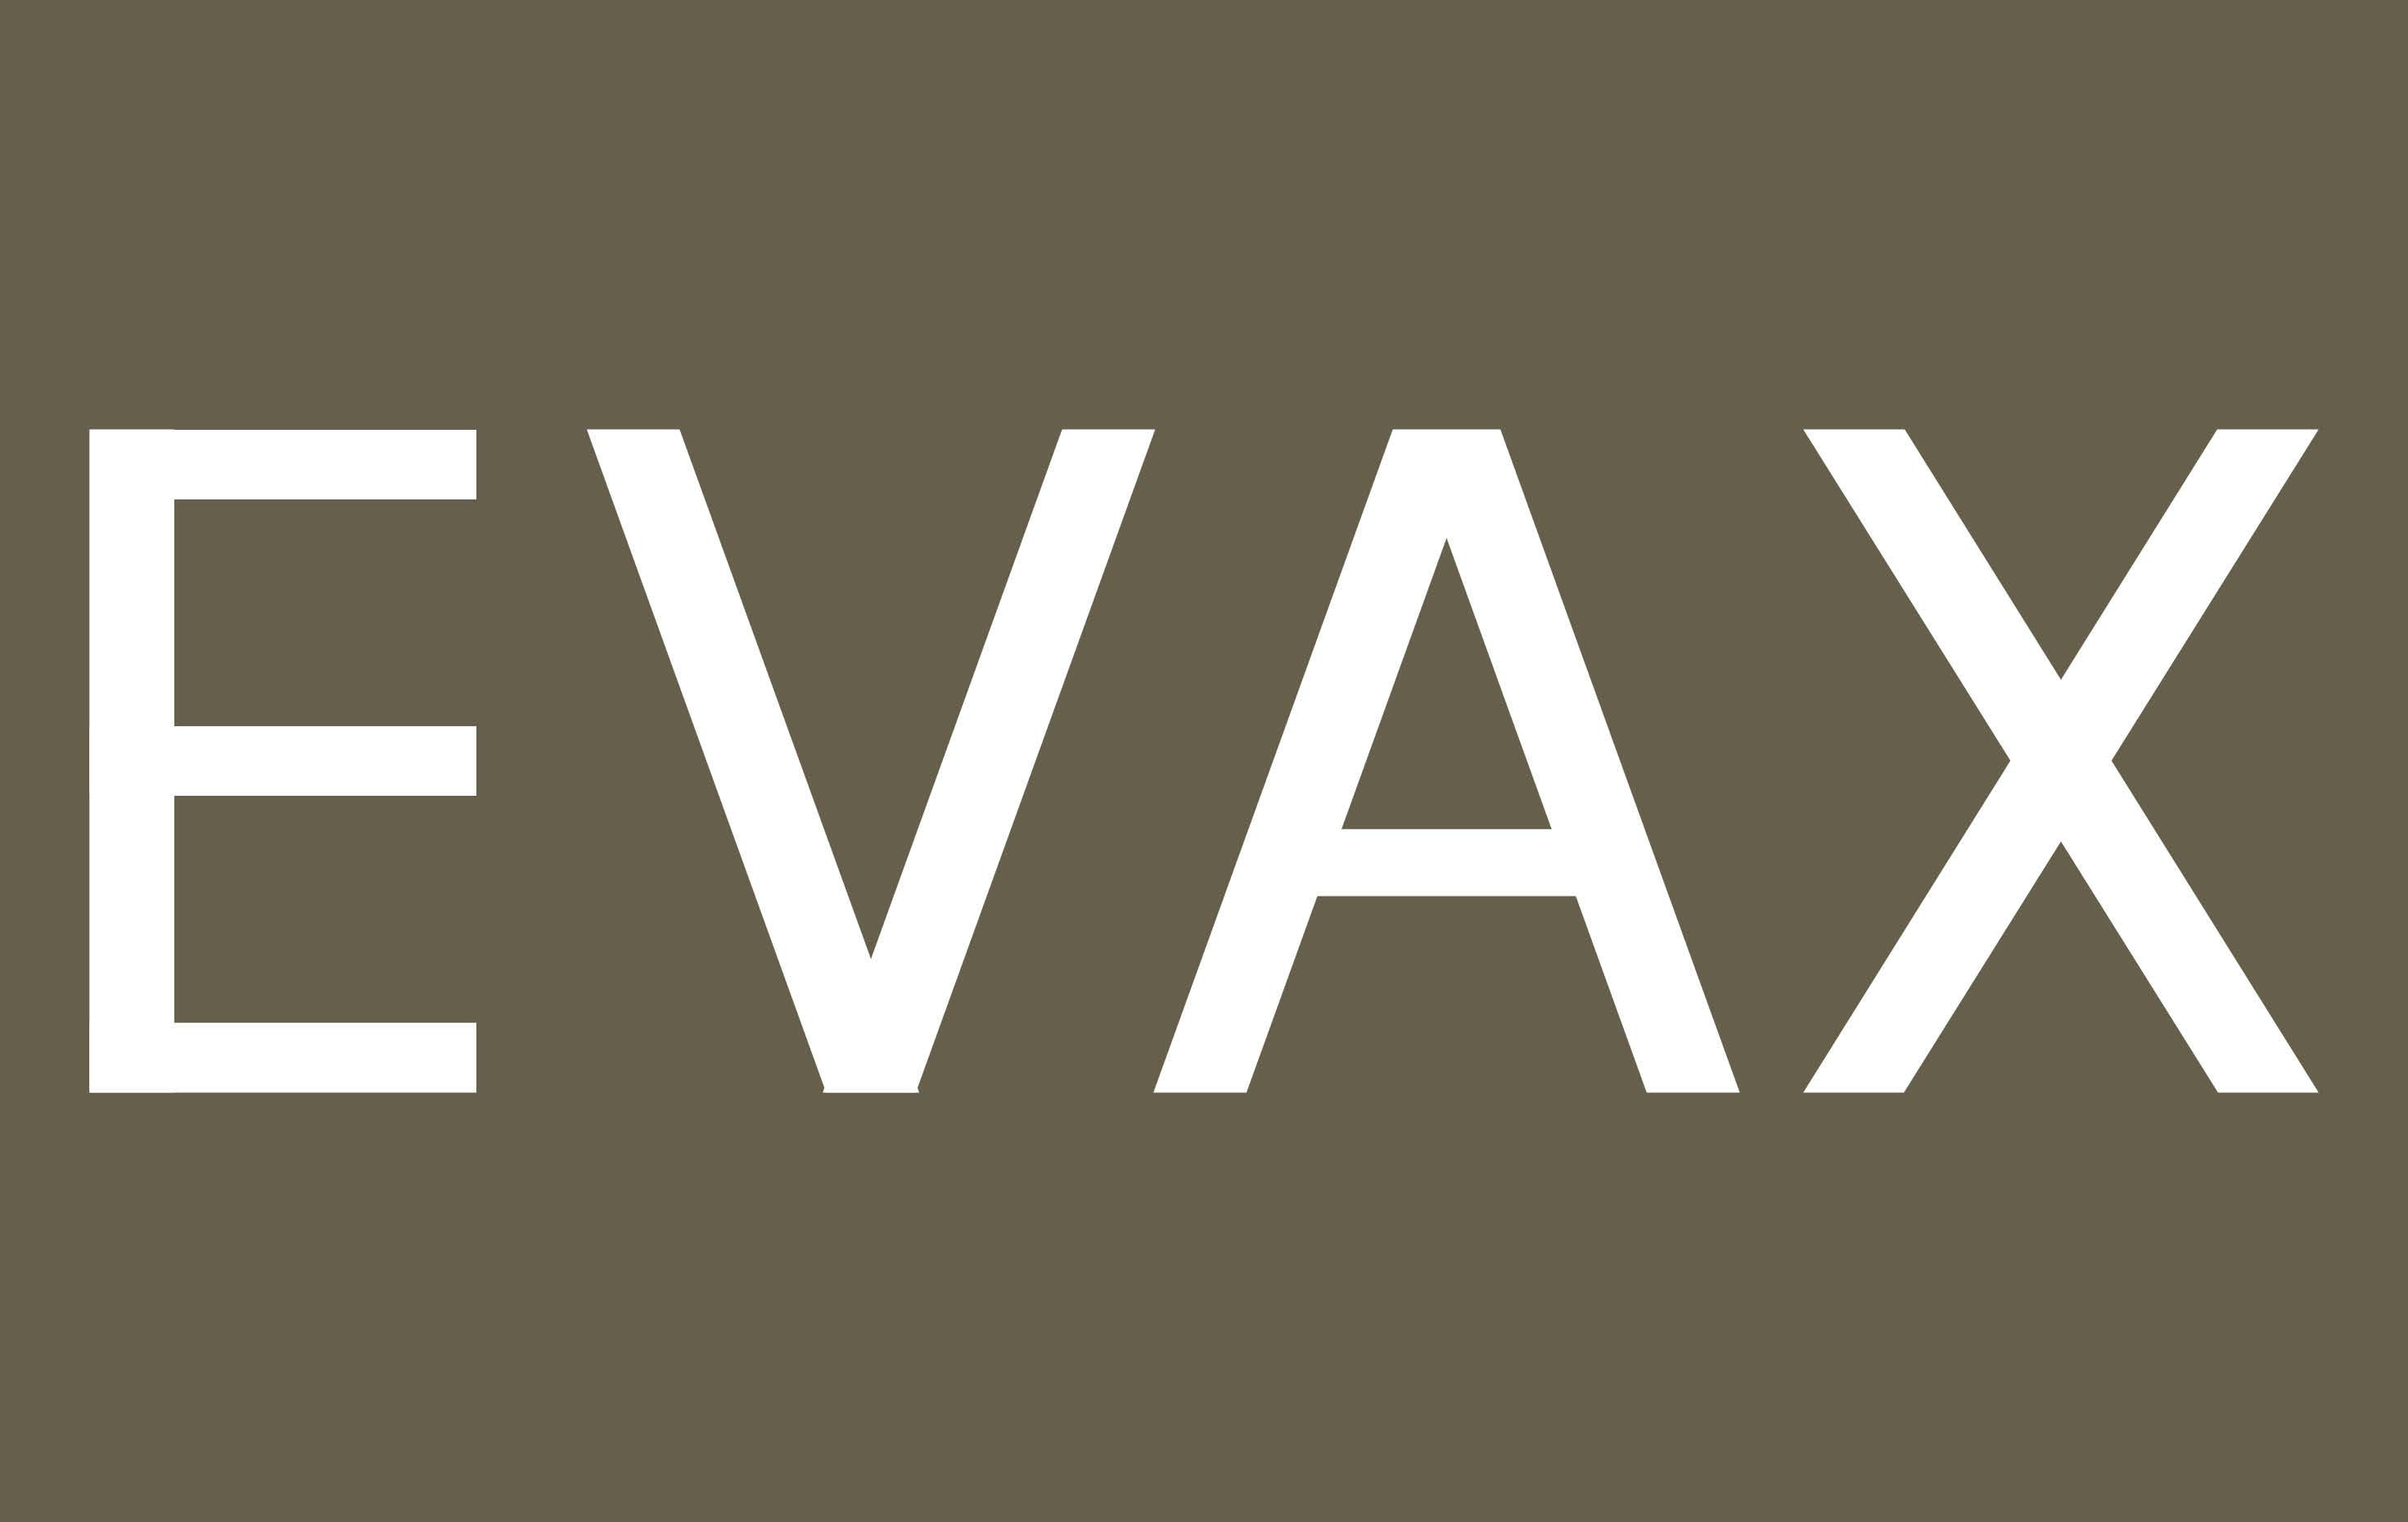 <p>Evaxion Announces Phase 2 Clinical Trial Update: First Patient Completed Dosing with Personalized Cancer Vaccine EVX-01</p>